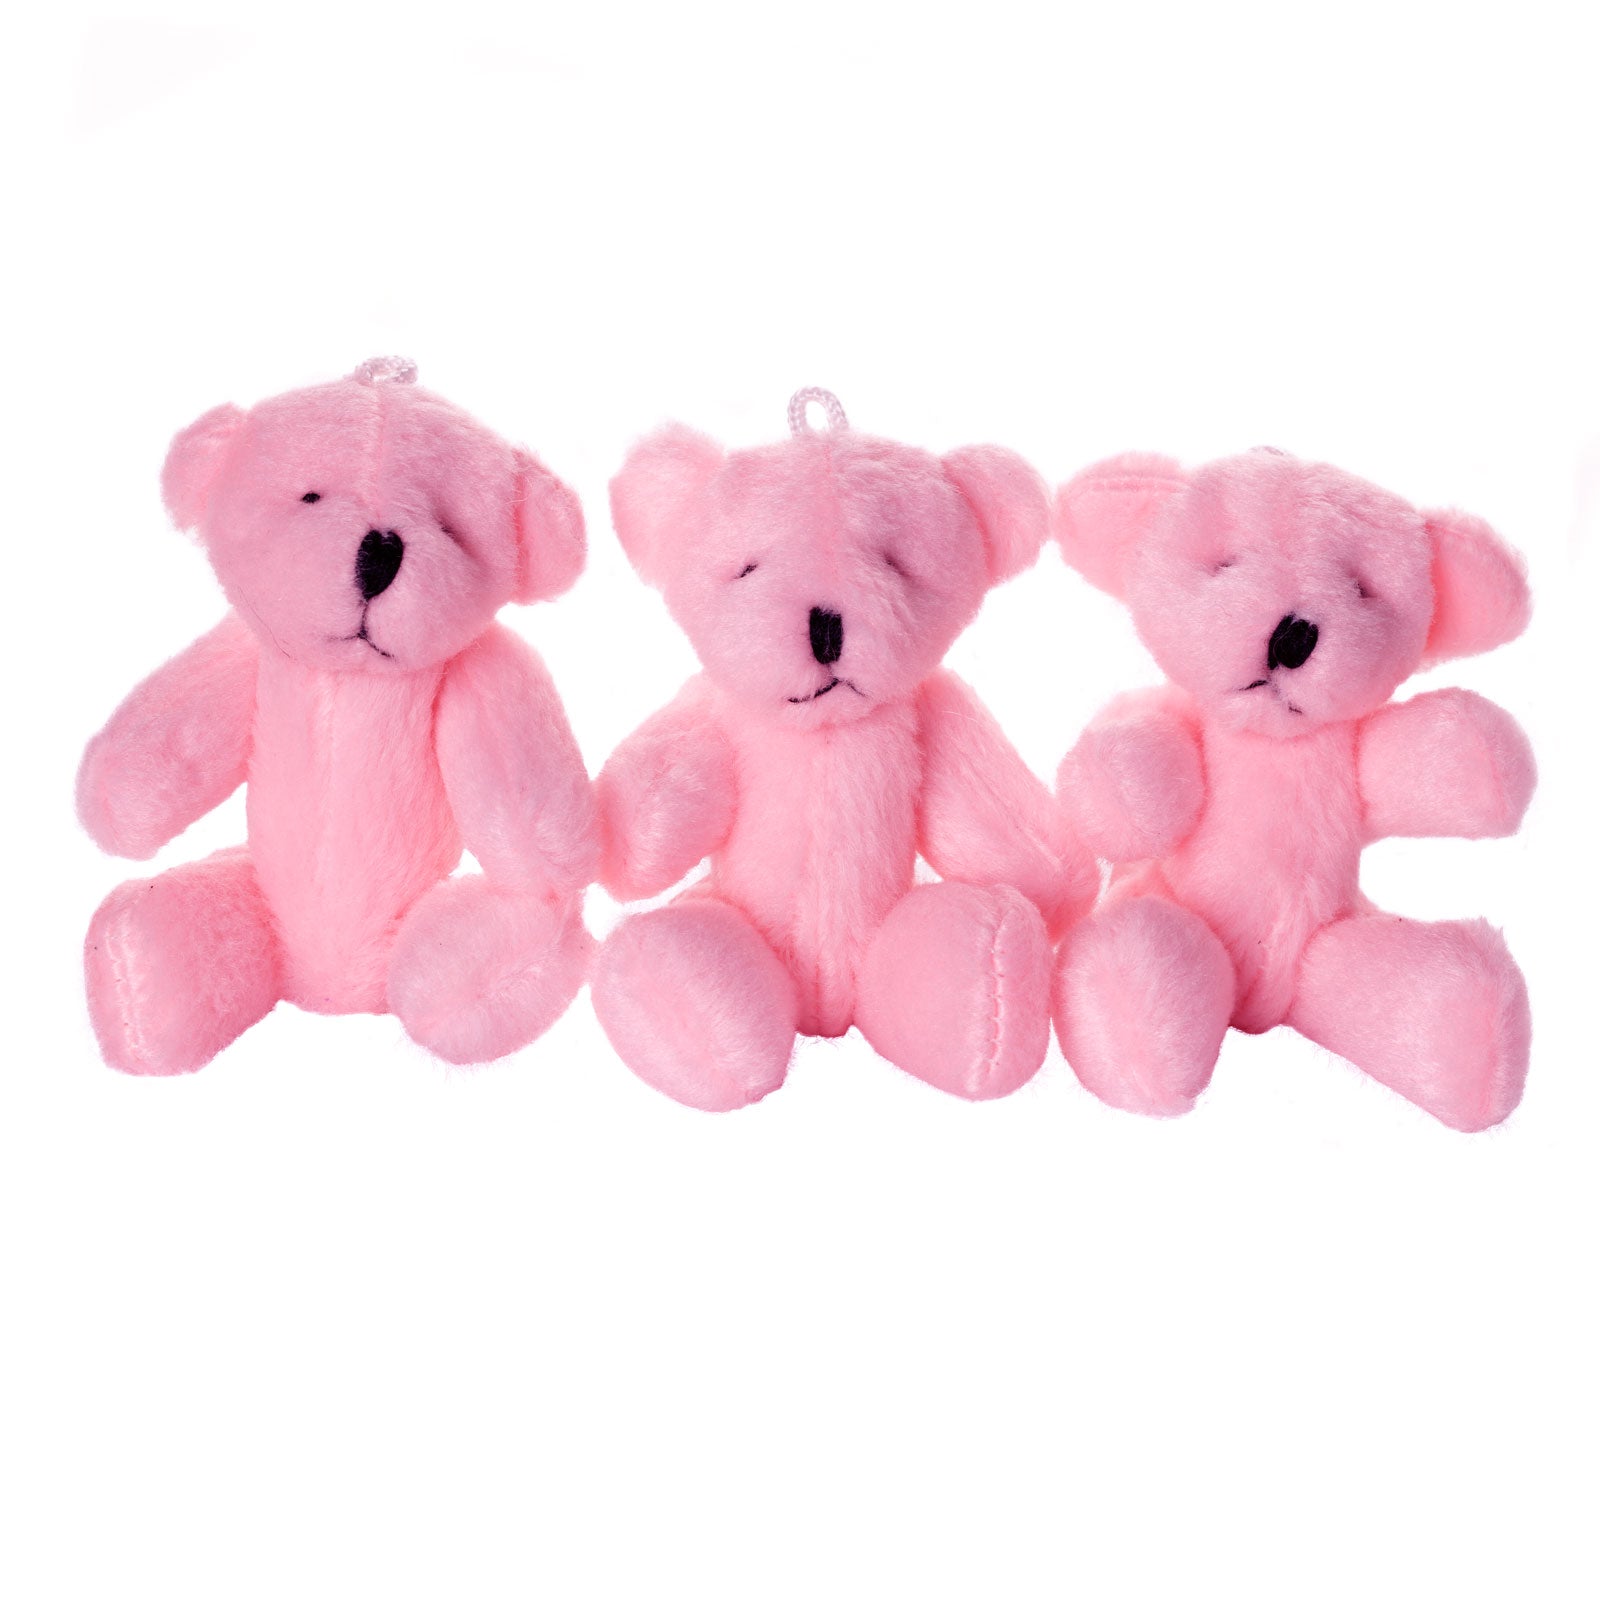 Small PINK Teddy Bears X 85 - Cute Soft Adorable